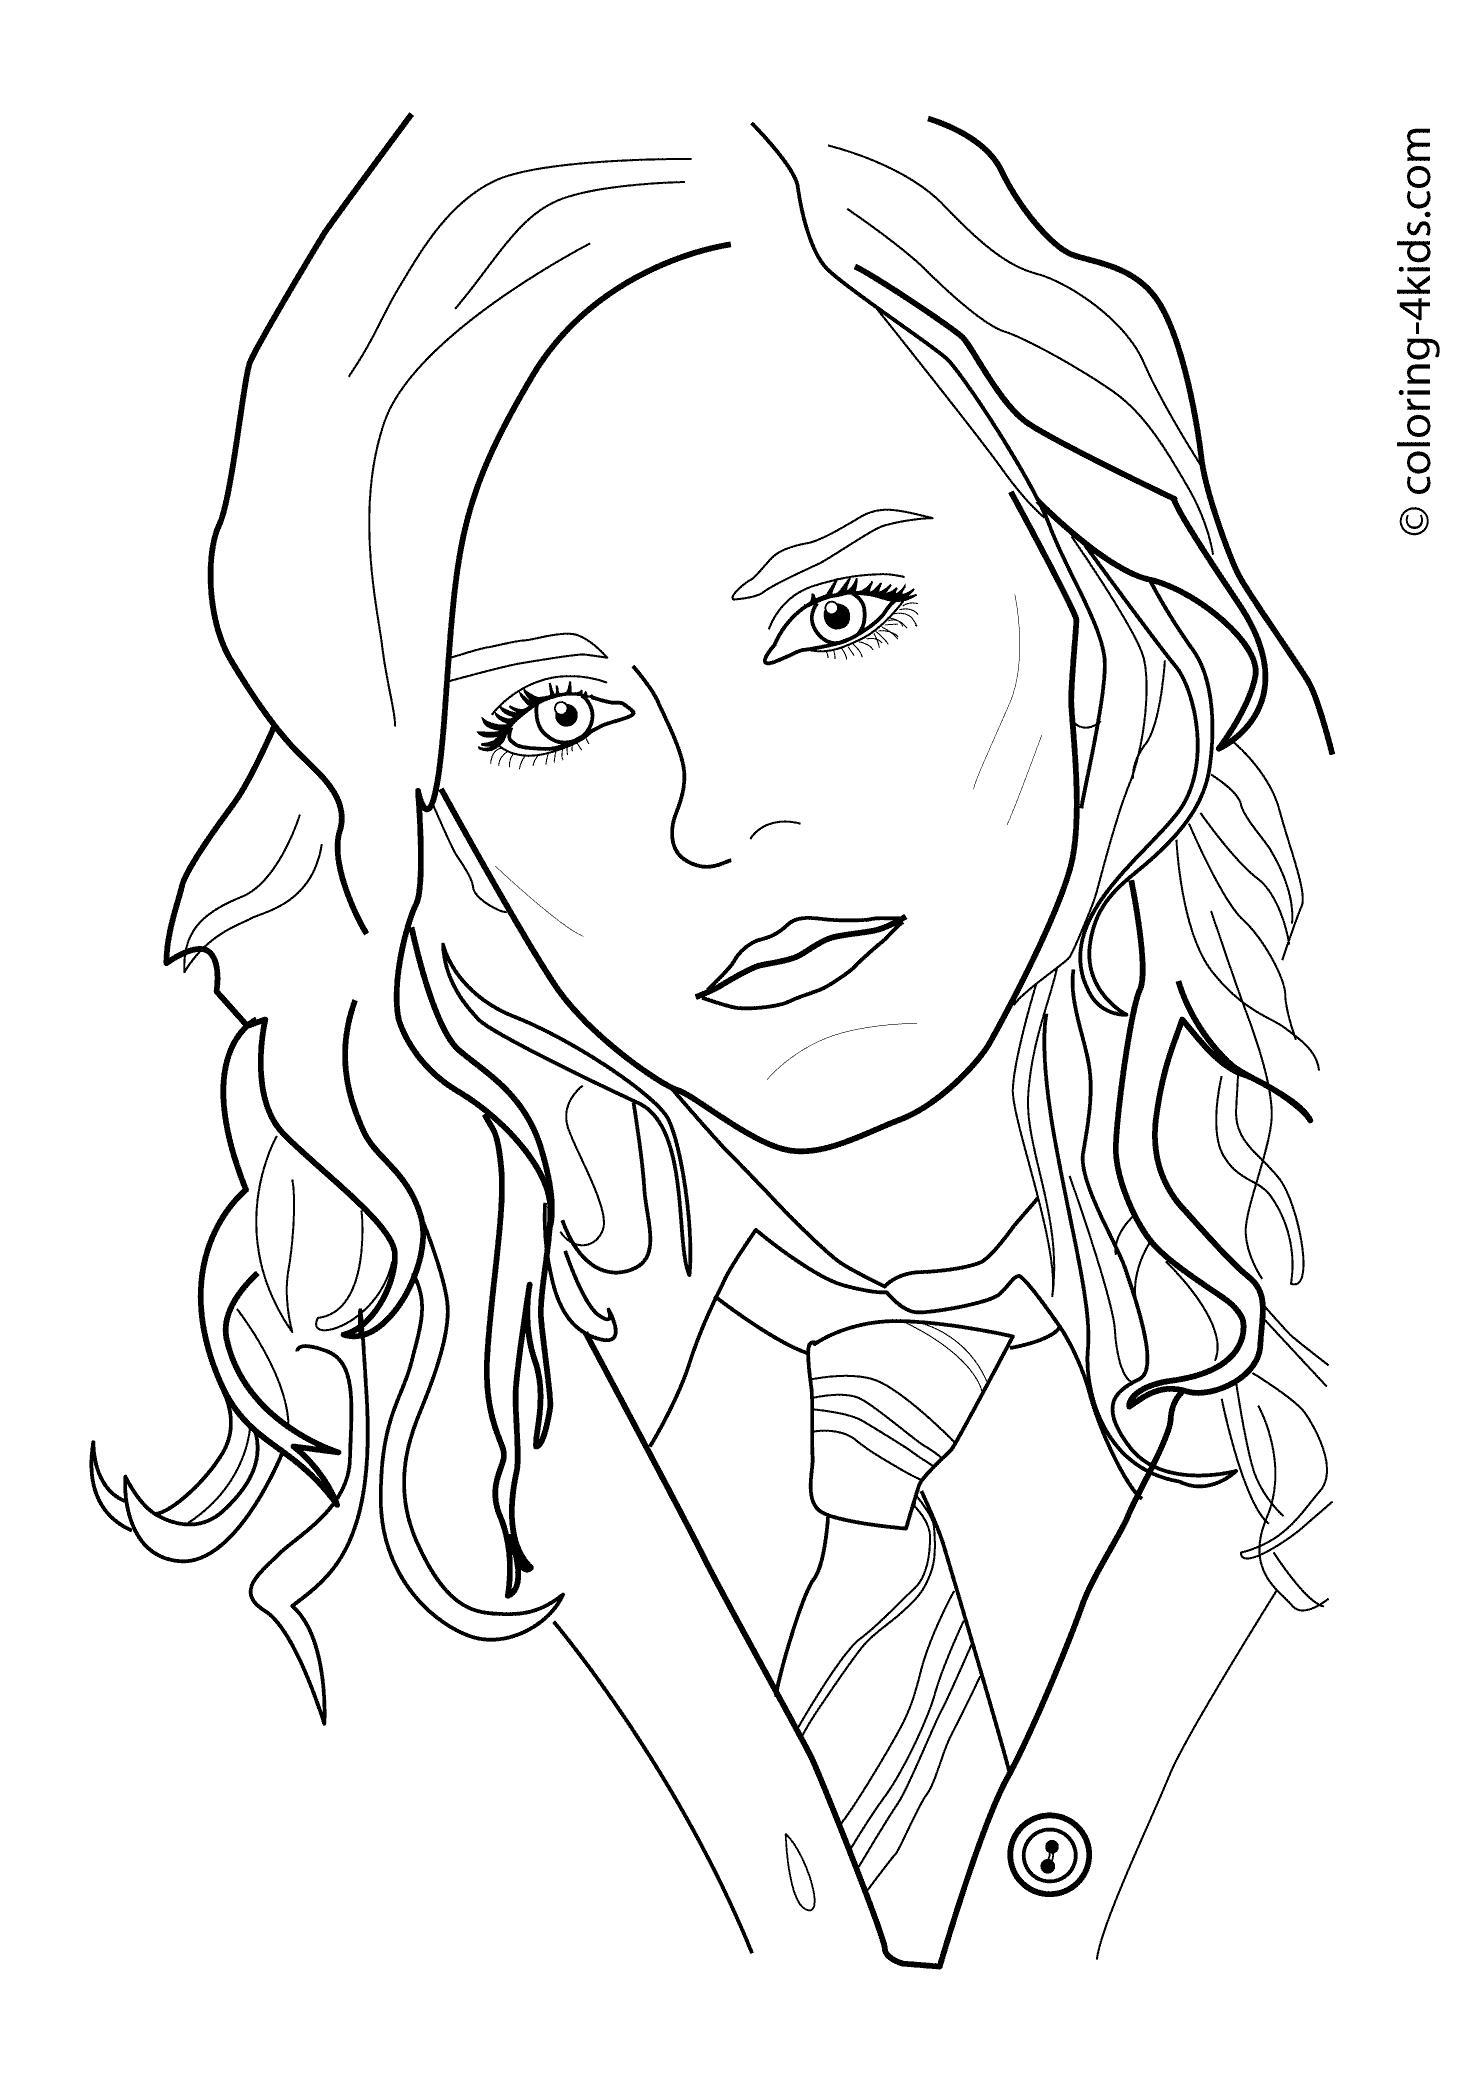 Emma Watson coloring pages for kids, printable free coloring books |  coloing-4kids.com